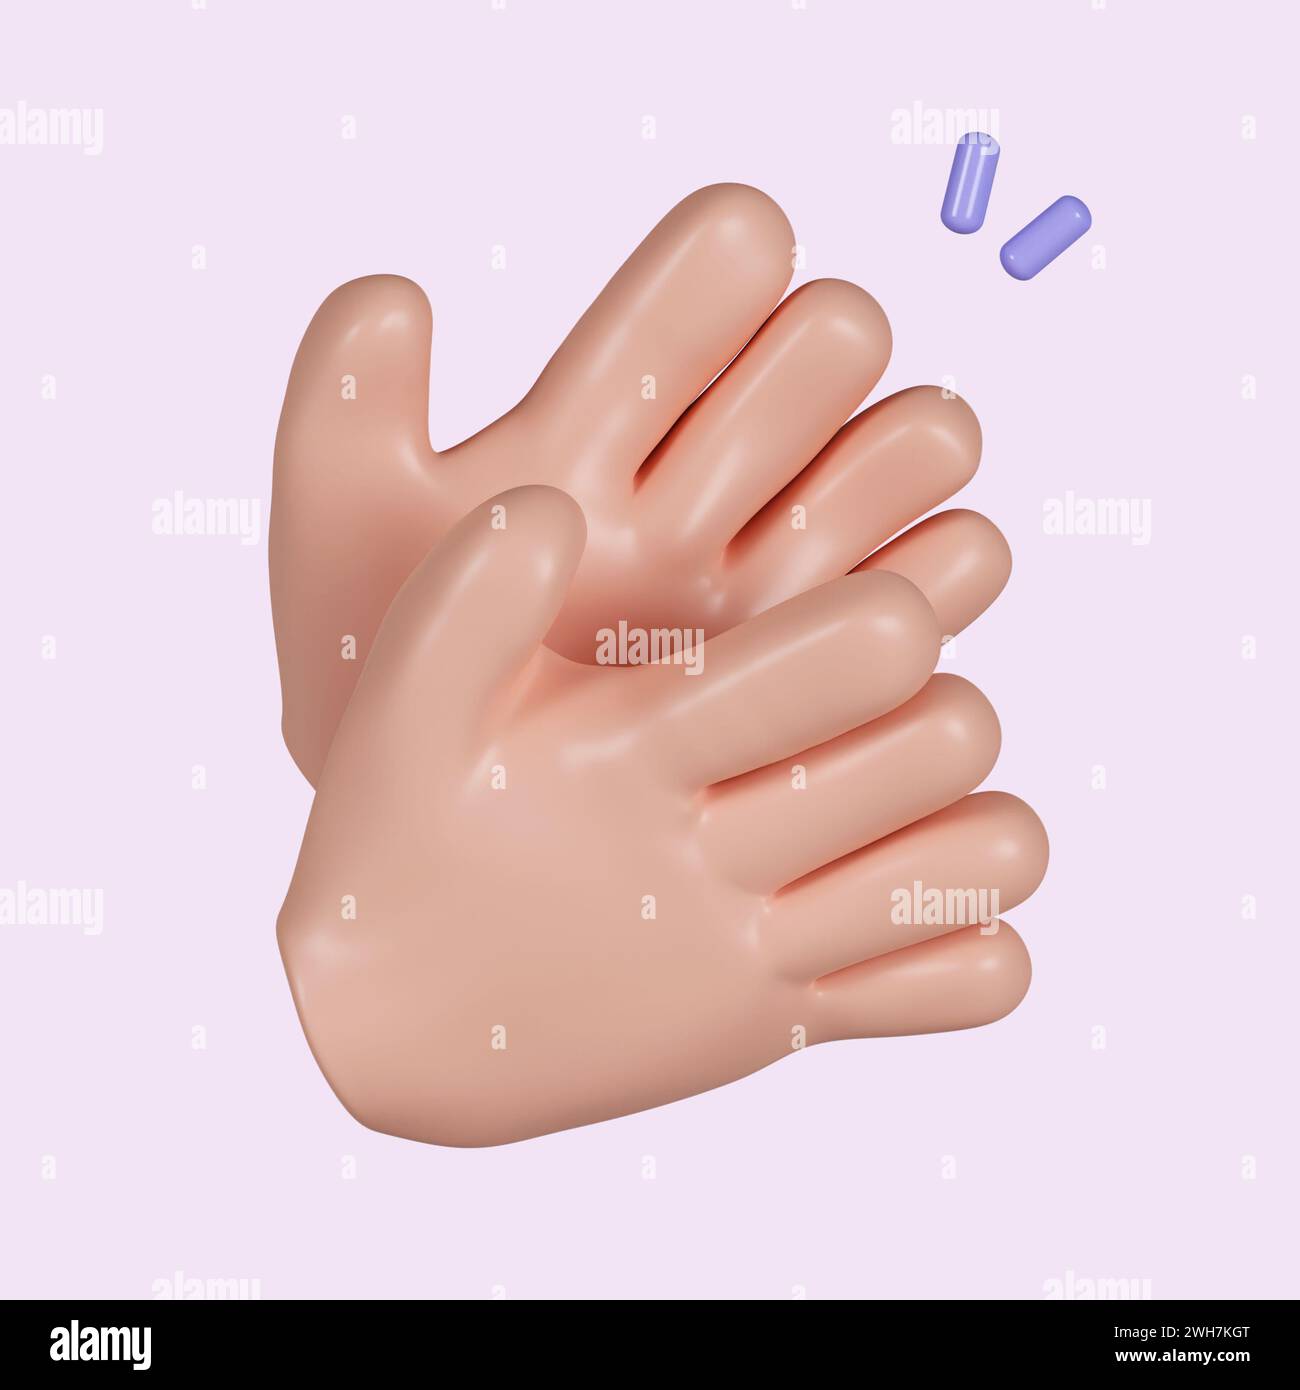 3d Cartoon human hand applause. icon isolated on pink background. 3d rendering illustration. Clipping path. Stock Photo